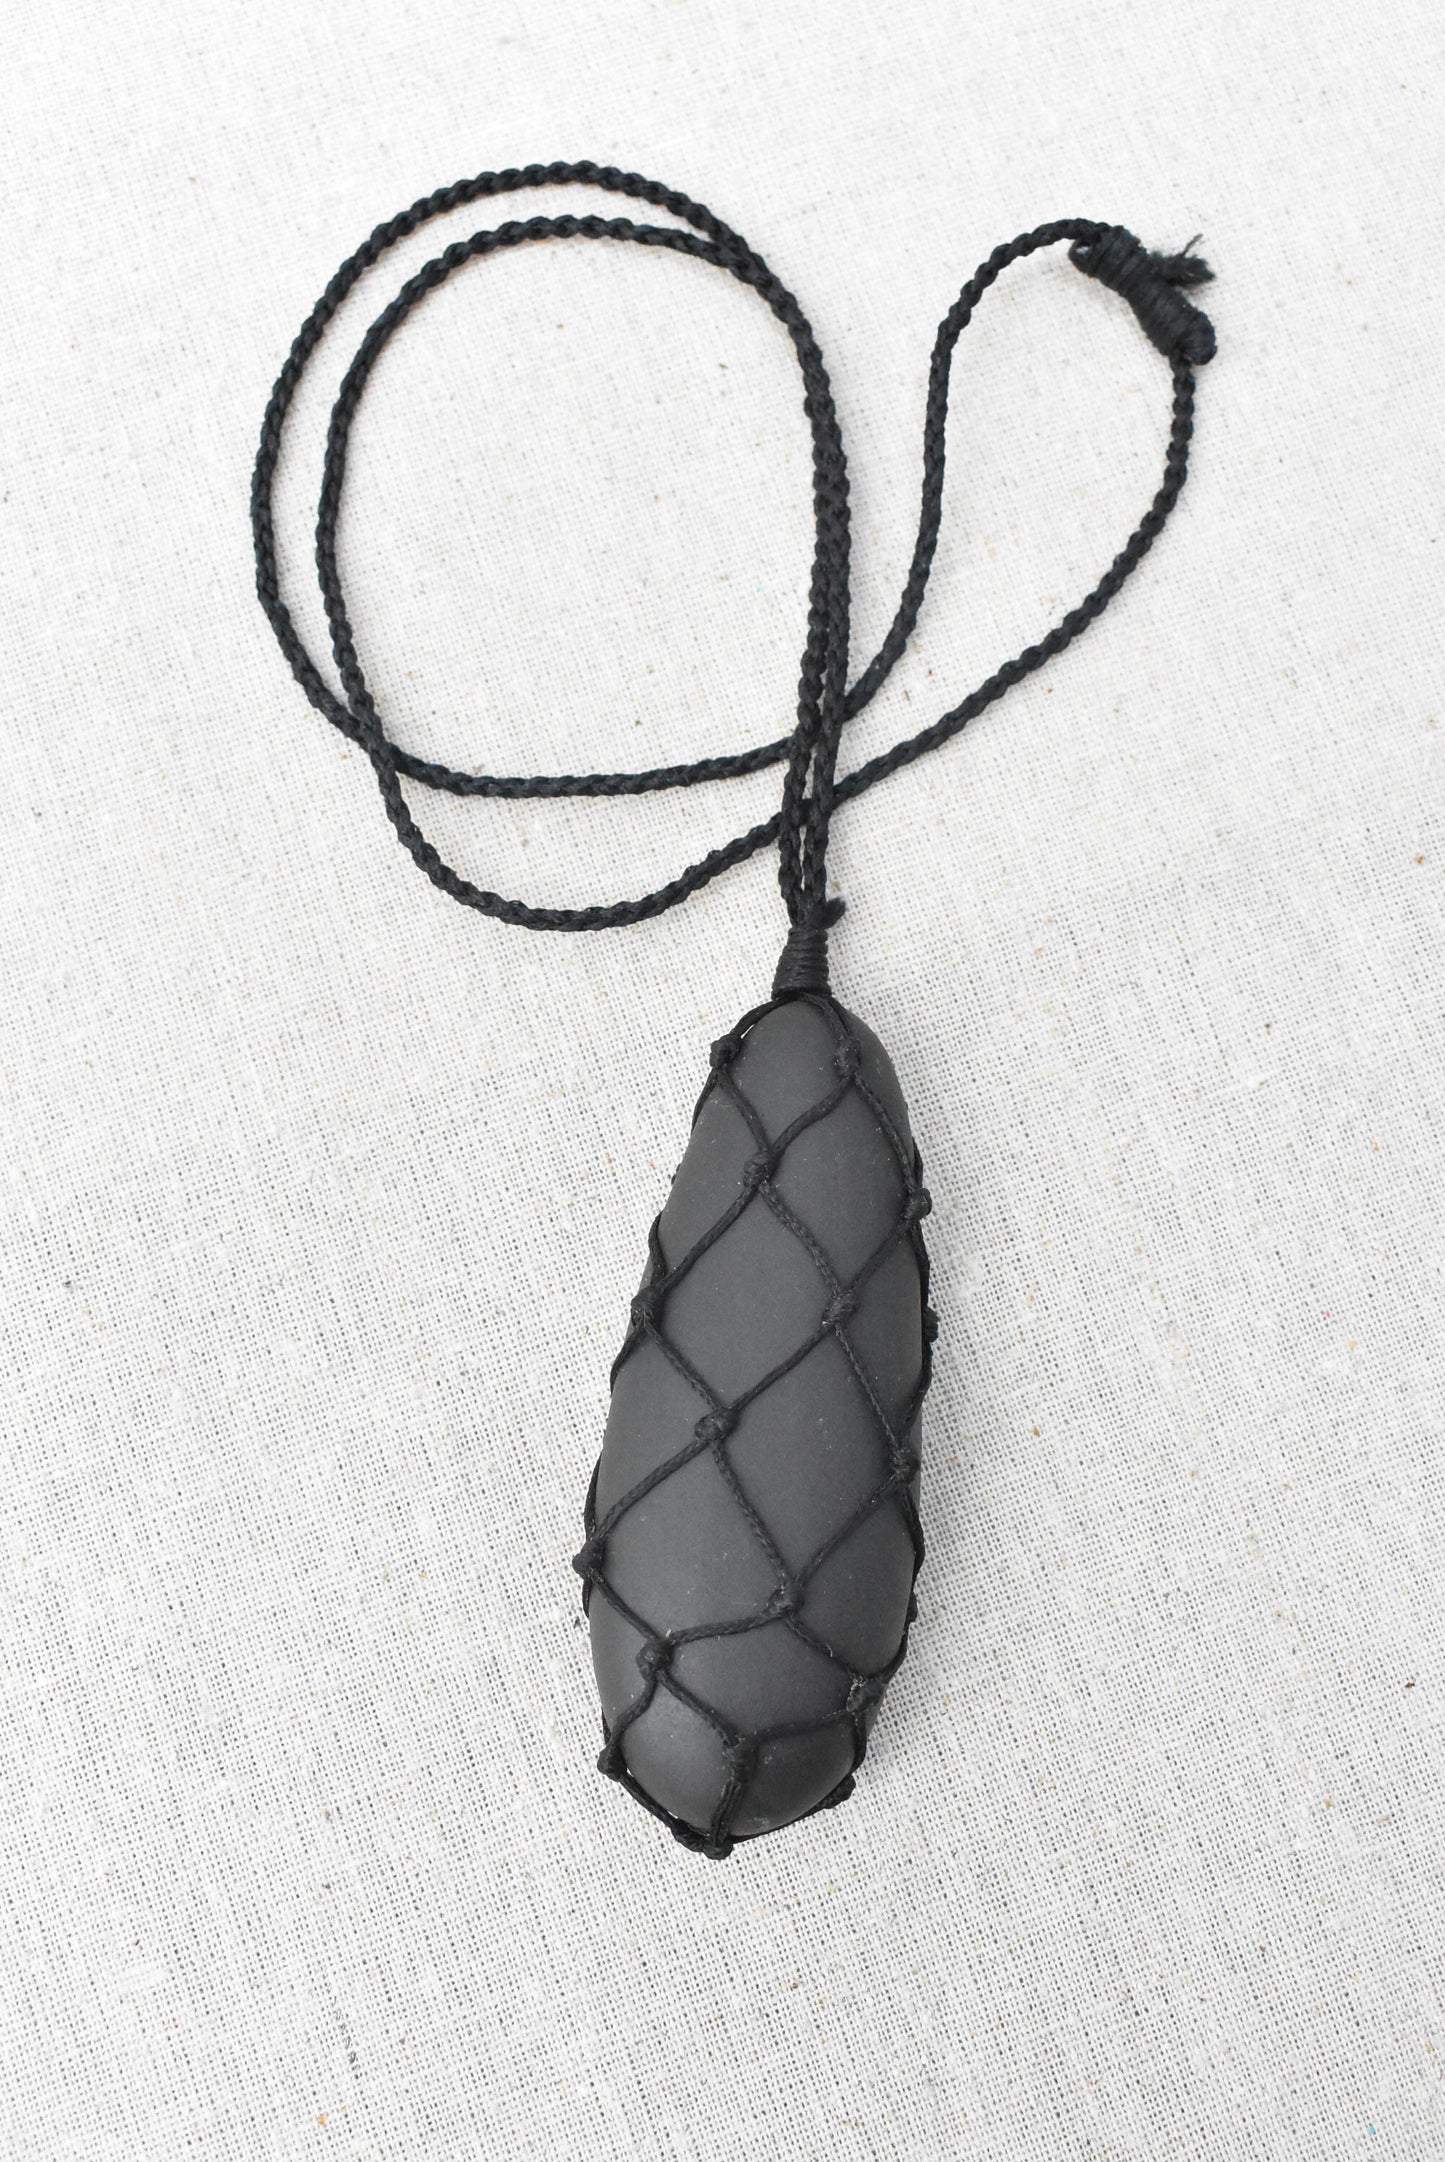 Smooth stone pouch necklace